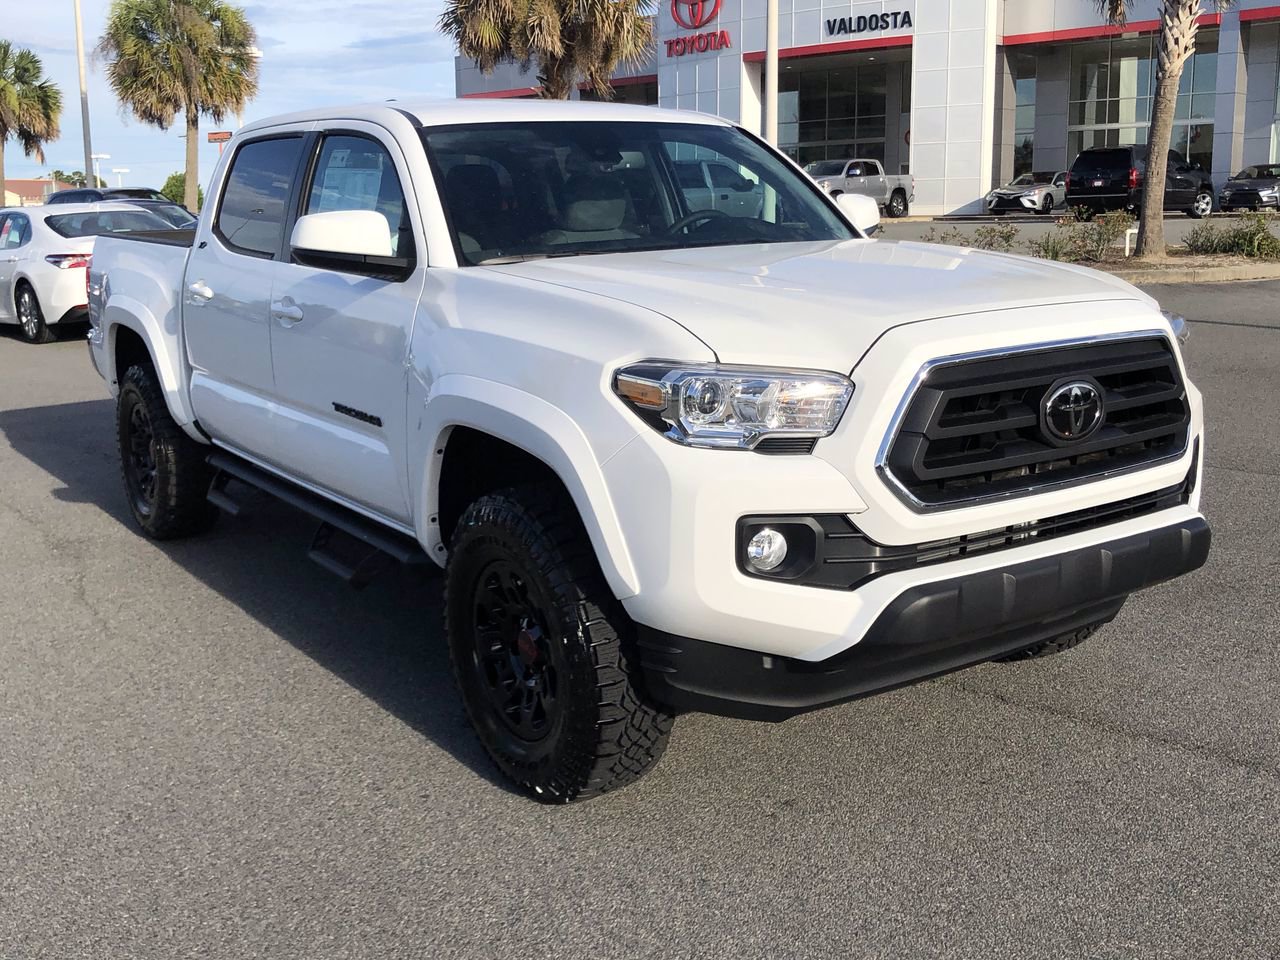 New 2020 Toyota Tacoma 2WD SR5 Double Cab V6 Crew Cab Pickup in Valdsota #220821 | Butler Auto Group